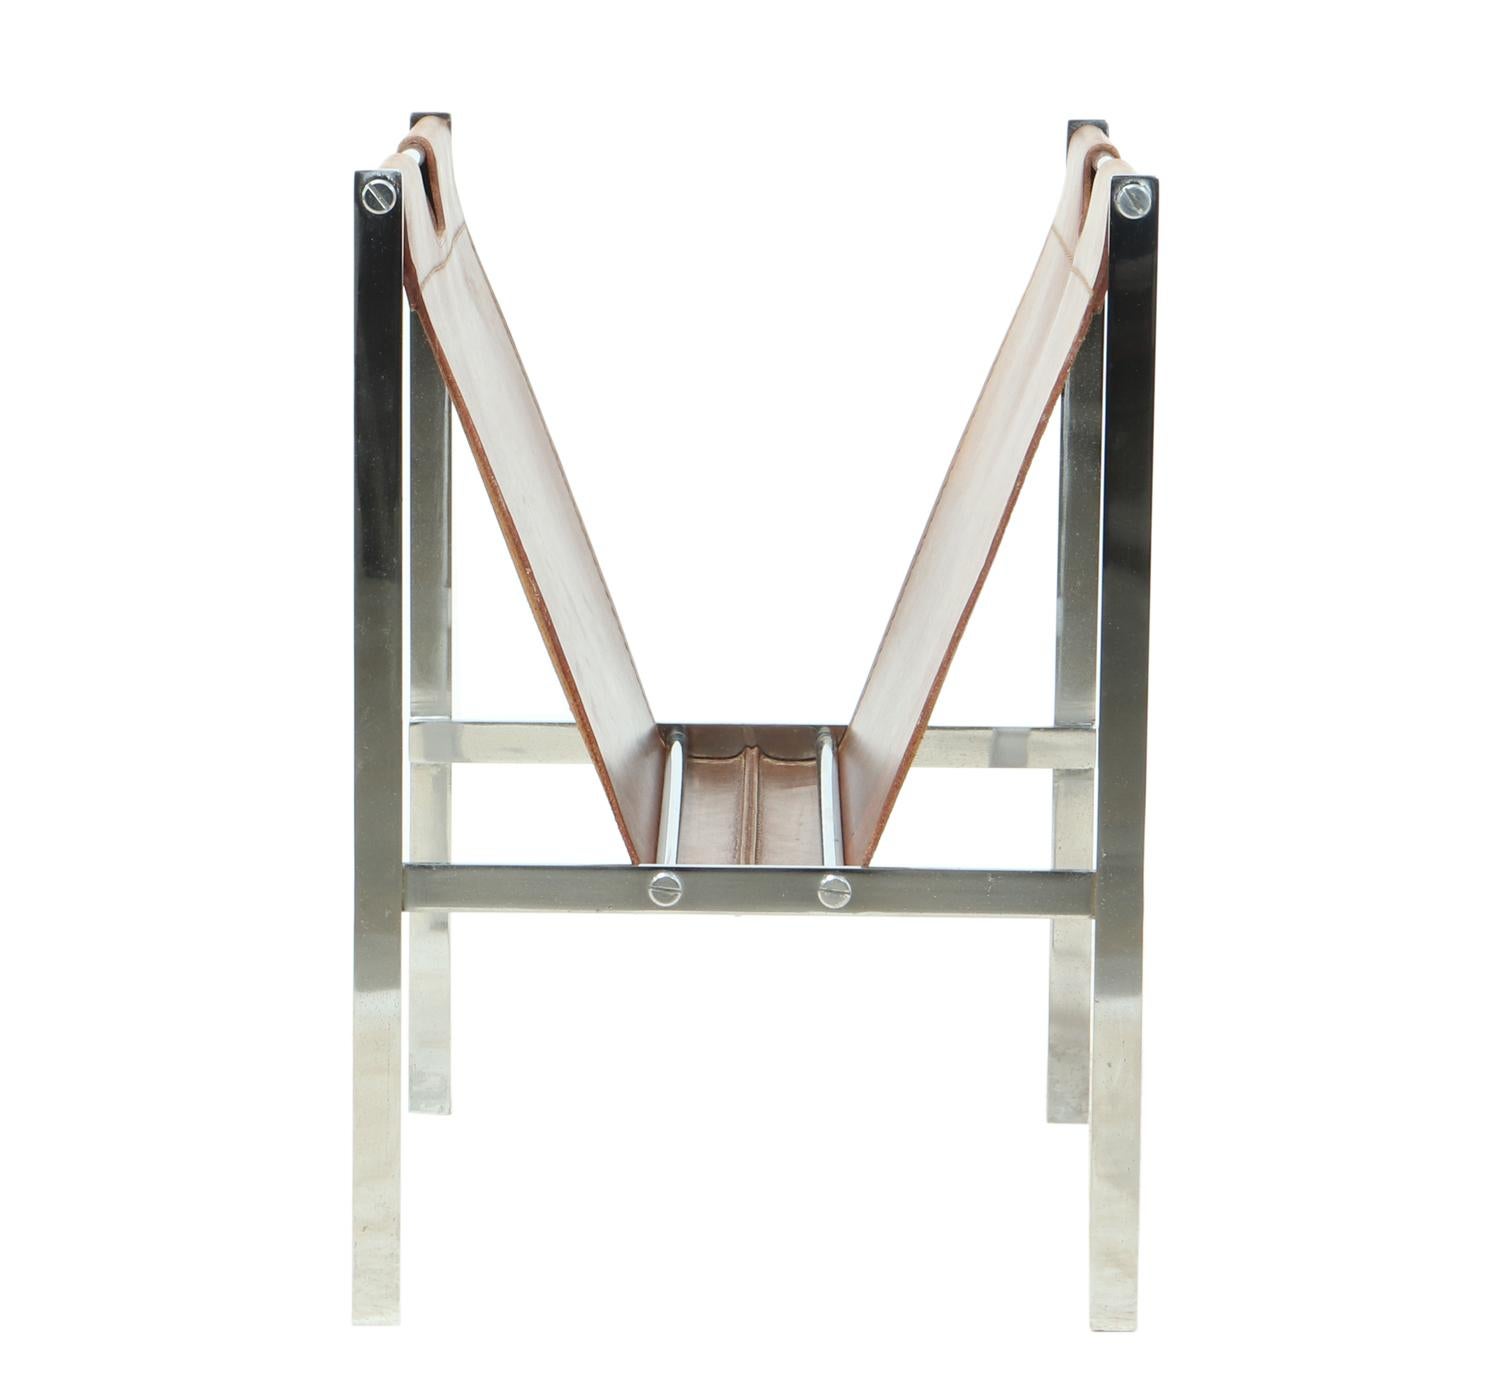 Chrome and coach leather magazine rack, circa 1960
A very good quality chromed steel and stitched coach leather magazine or book rack in very good condition with minimal wear

Age: 1960

Style: Mid-Century Modern

Material: Chromed steel and